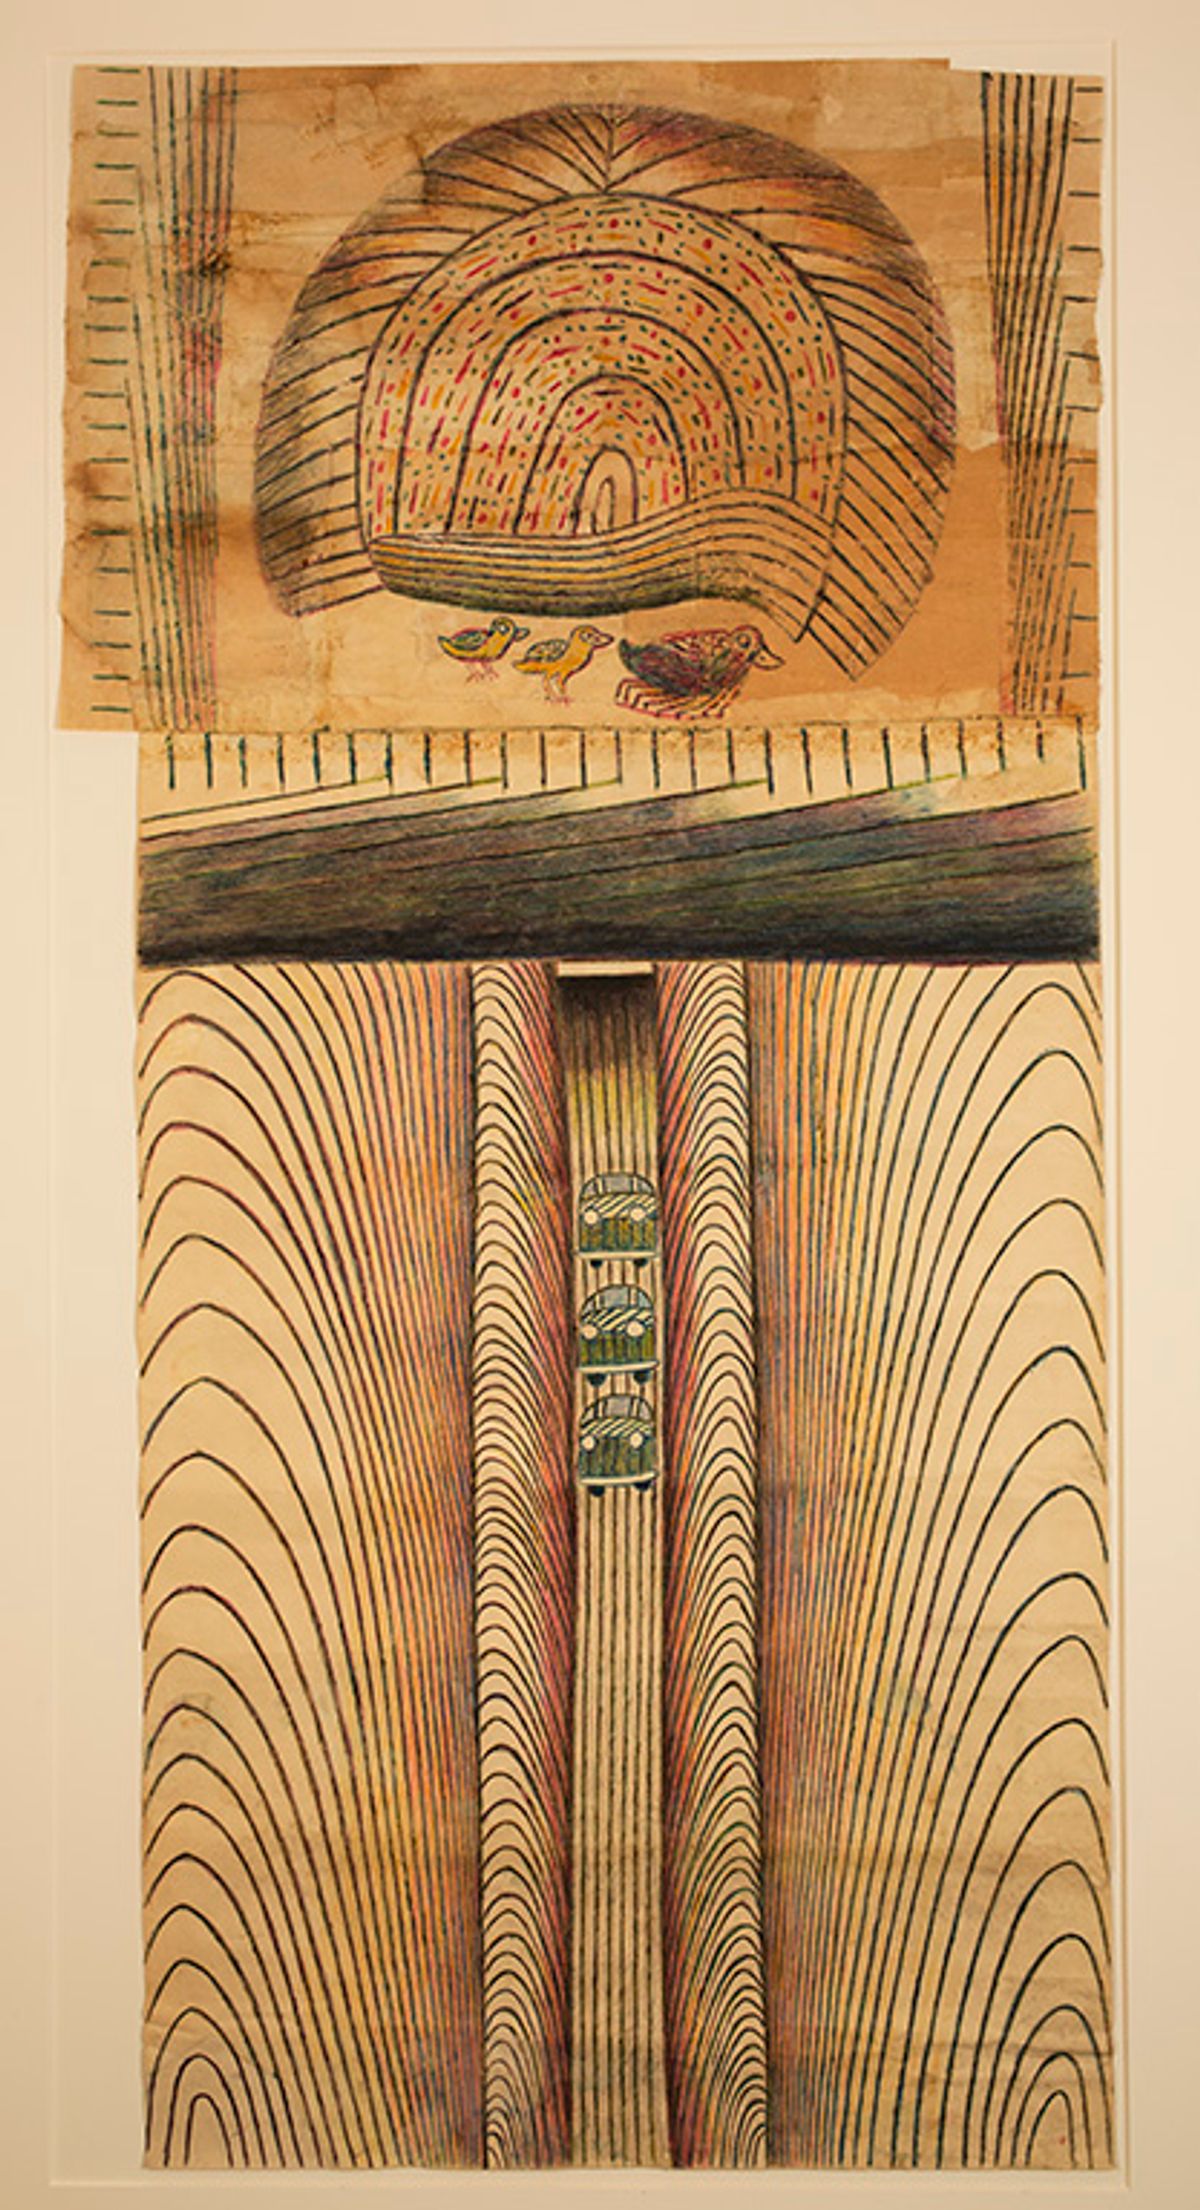 An untitled work by Martín Ramírez from around 1952-55 in gouache, coloured pencil and graphite on pieced paper. Donated by the collector Audrey B. Heckler, it will go on view at the American Folk Art Museum later this year. Estate of Martín Ramírez/© Visko Hatfield